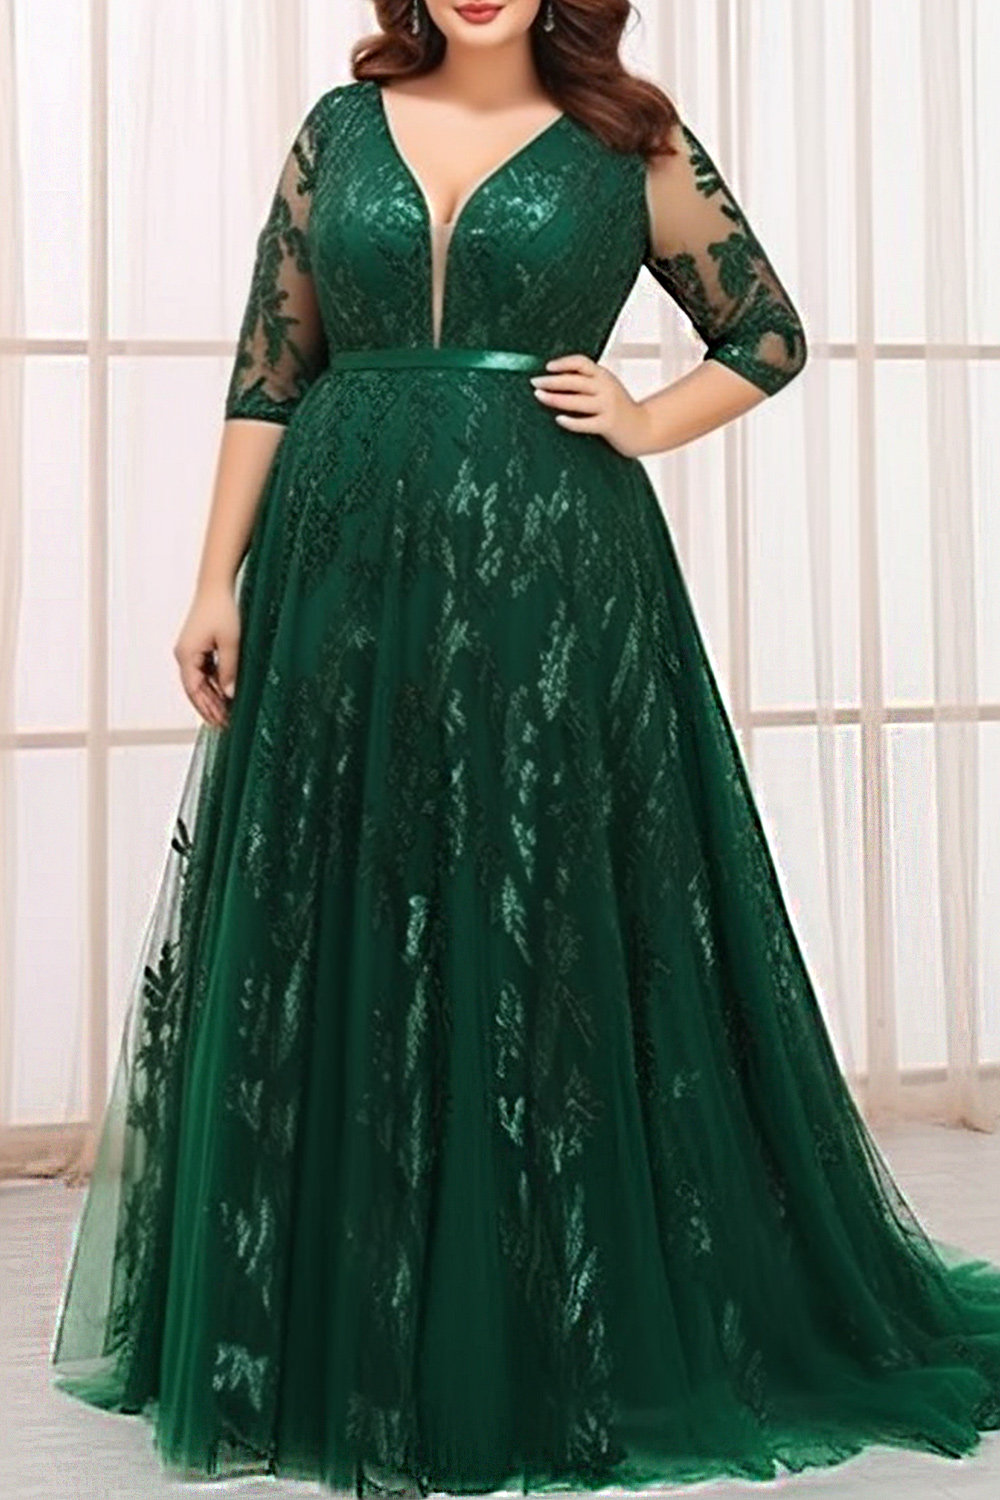 Flycurvy Plus Size Mother Of The Bride Green Lace Embroidery Mesh Deep V Neck 3/4 Sleeve Empire Waist Tunic Maxi Dress